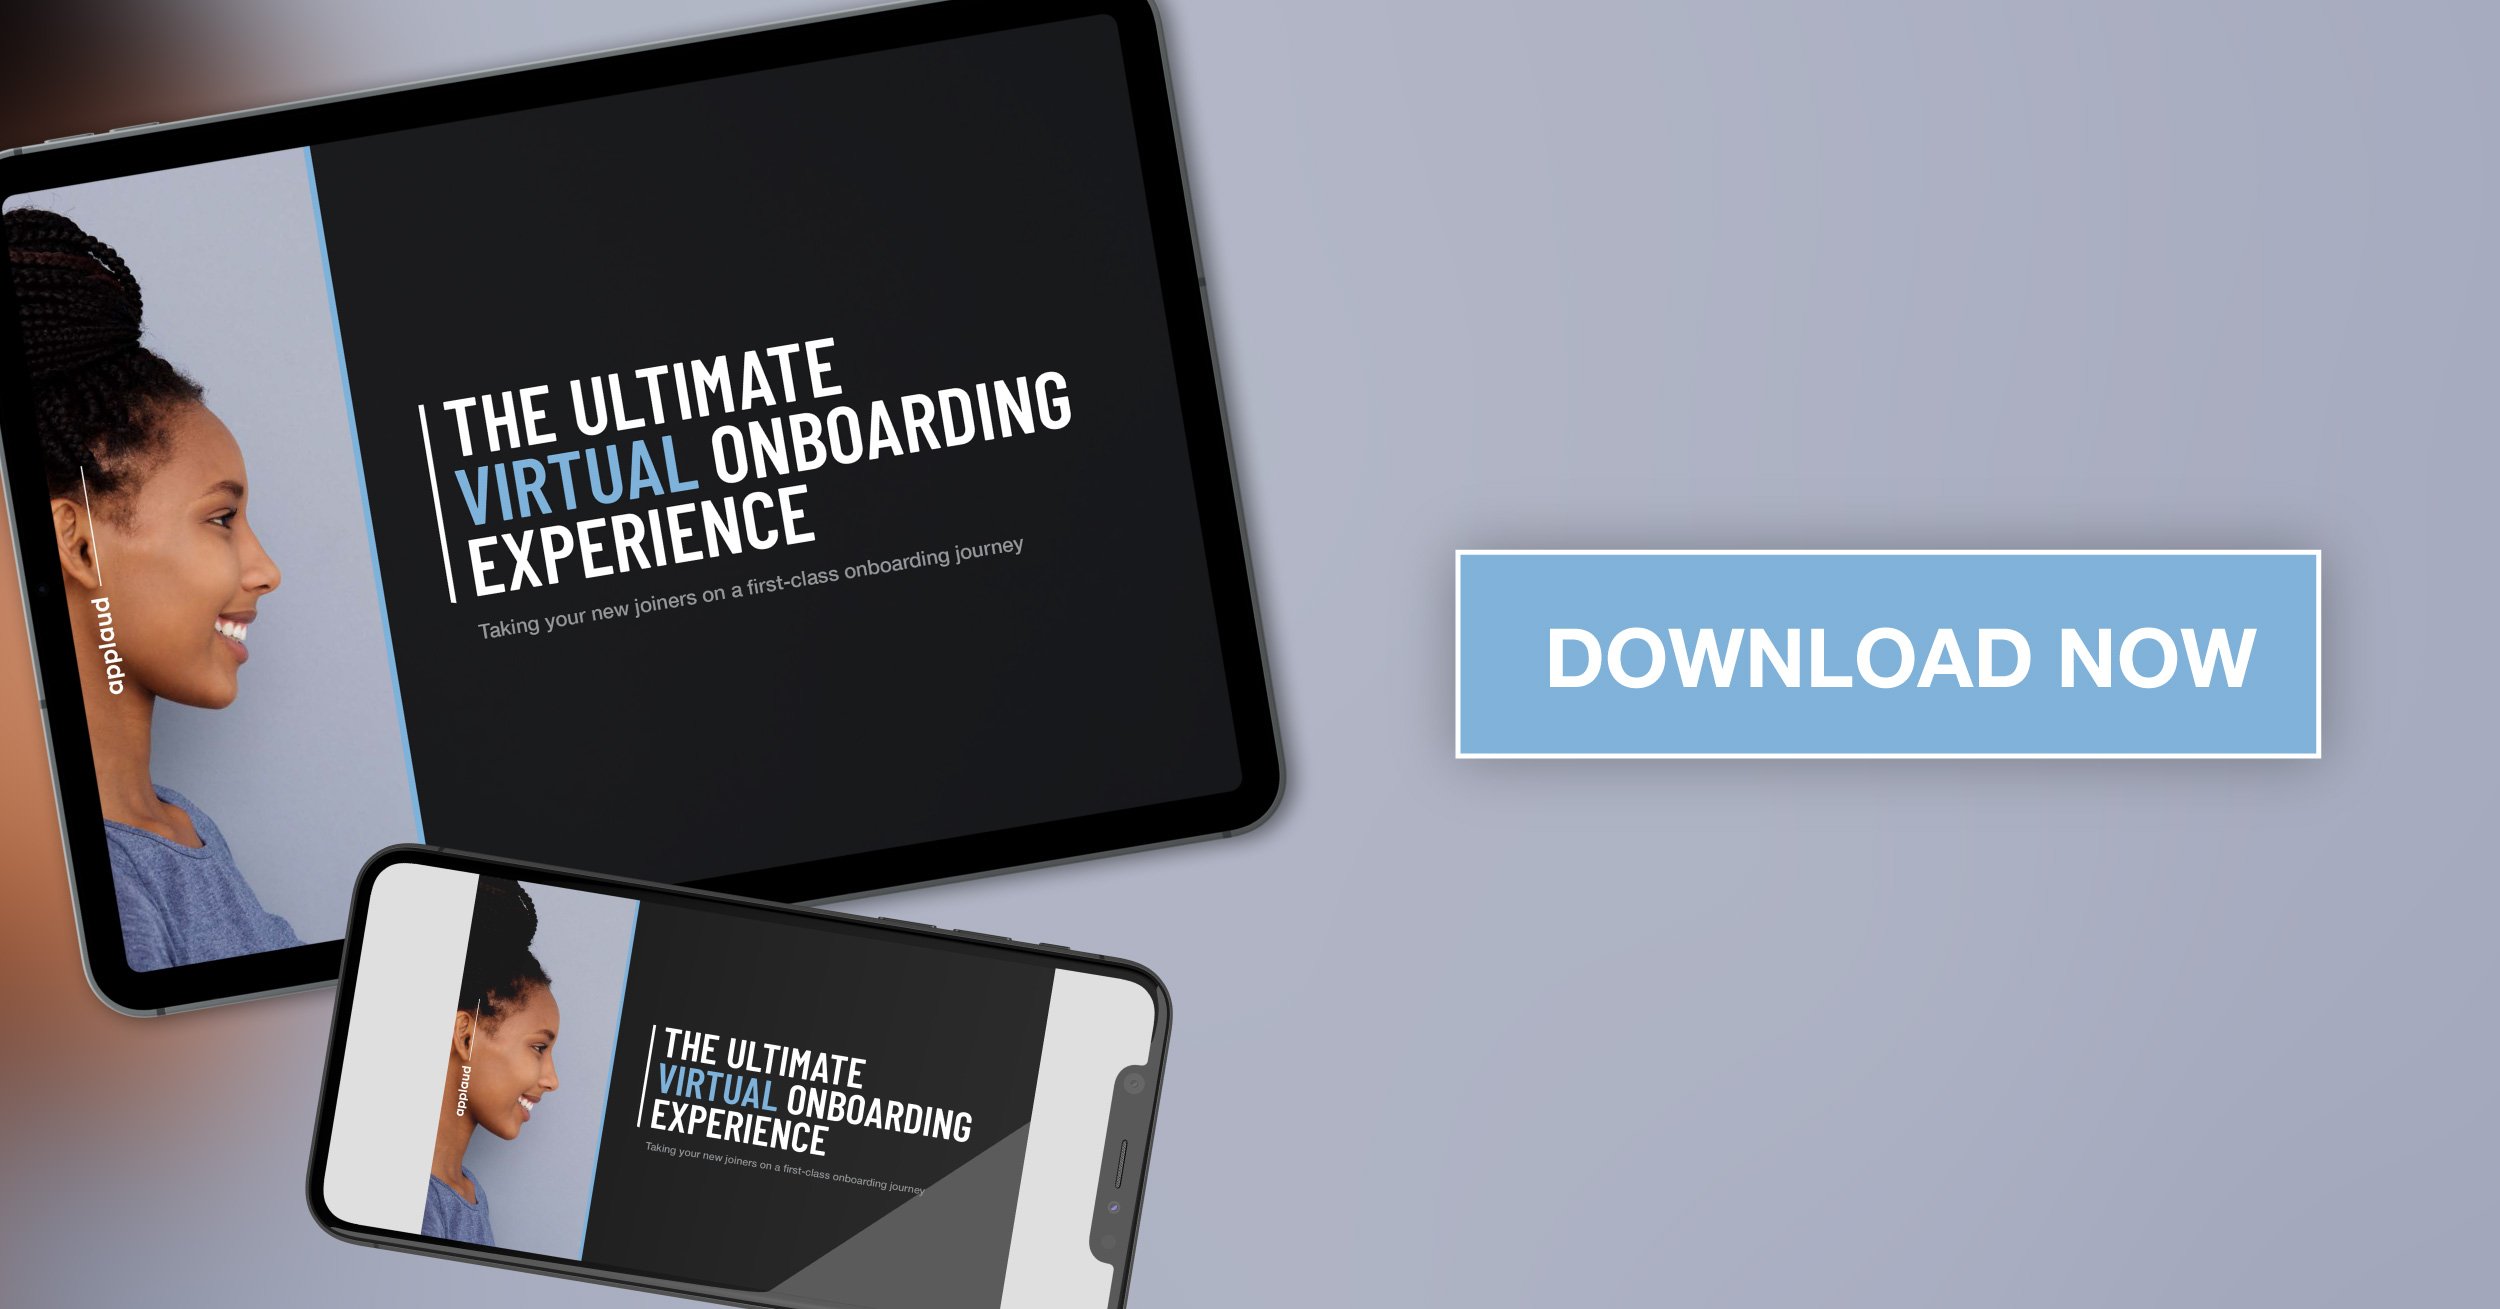 Applaud HR Guide to The Ultimate Virtual Onboarding Experience download graphic